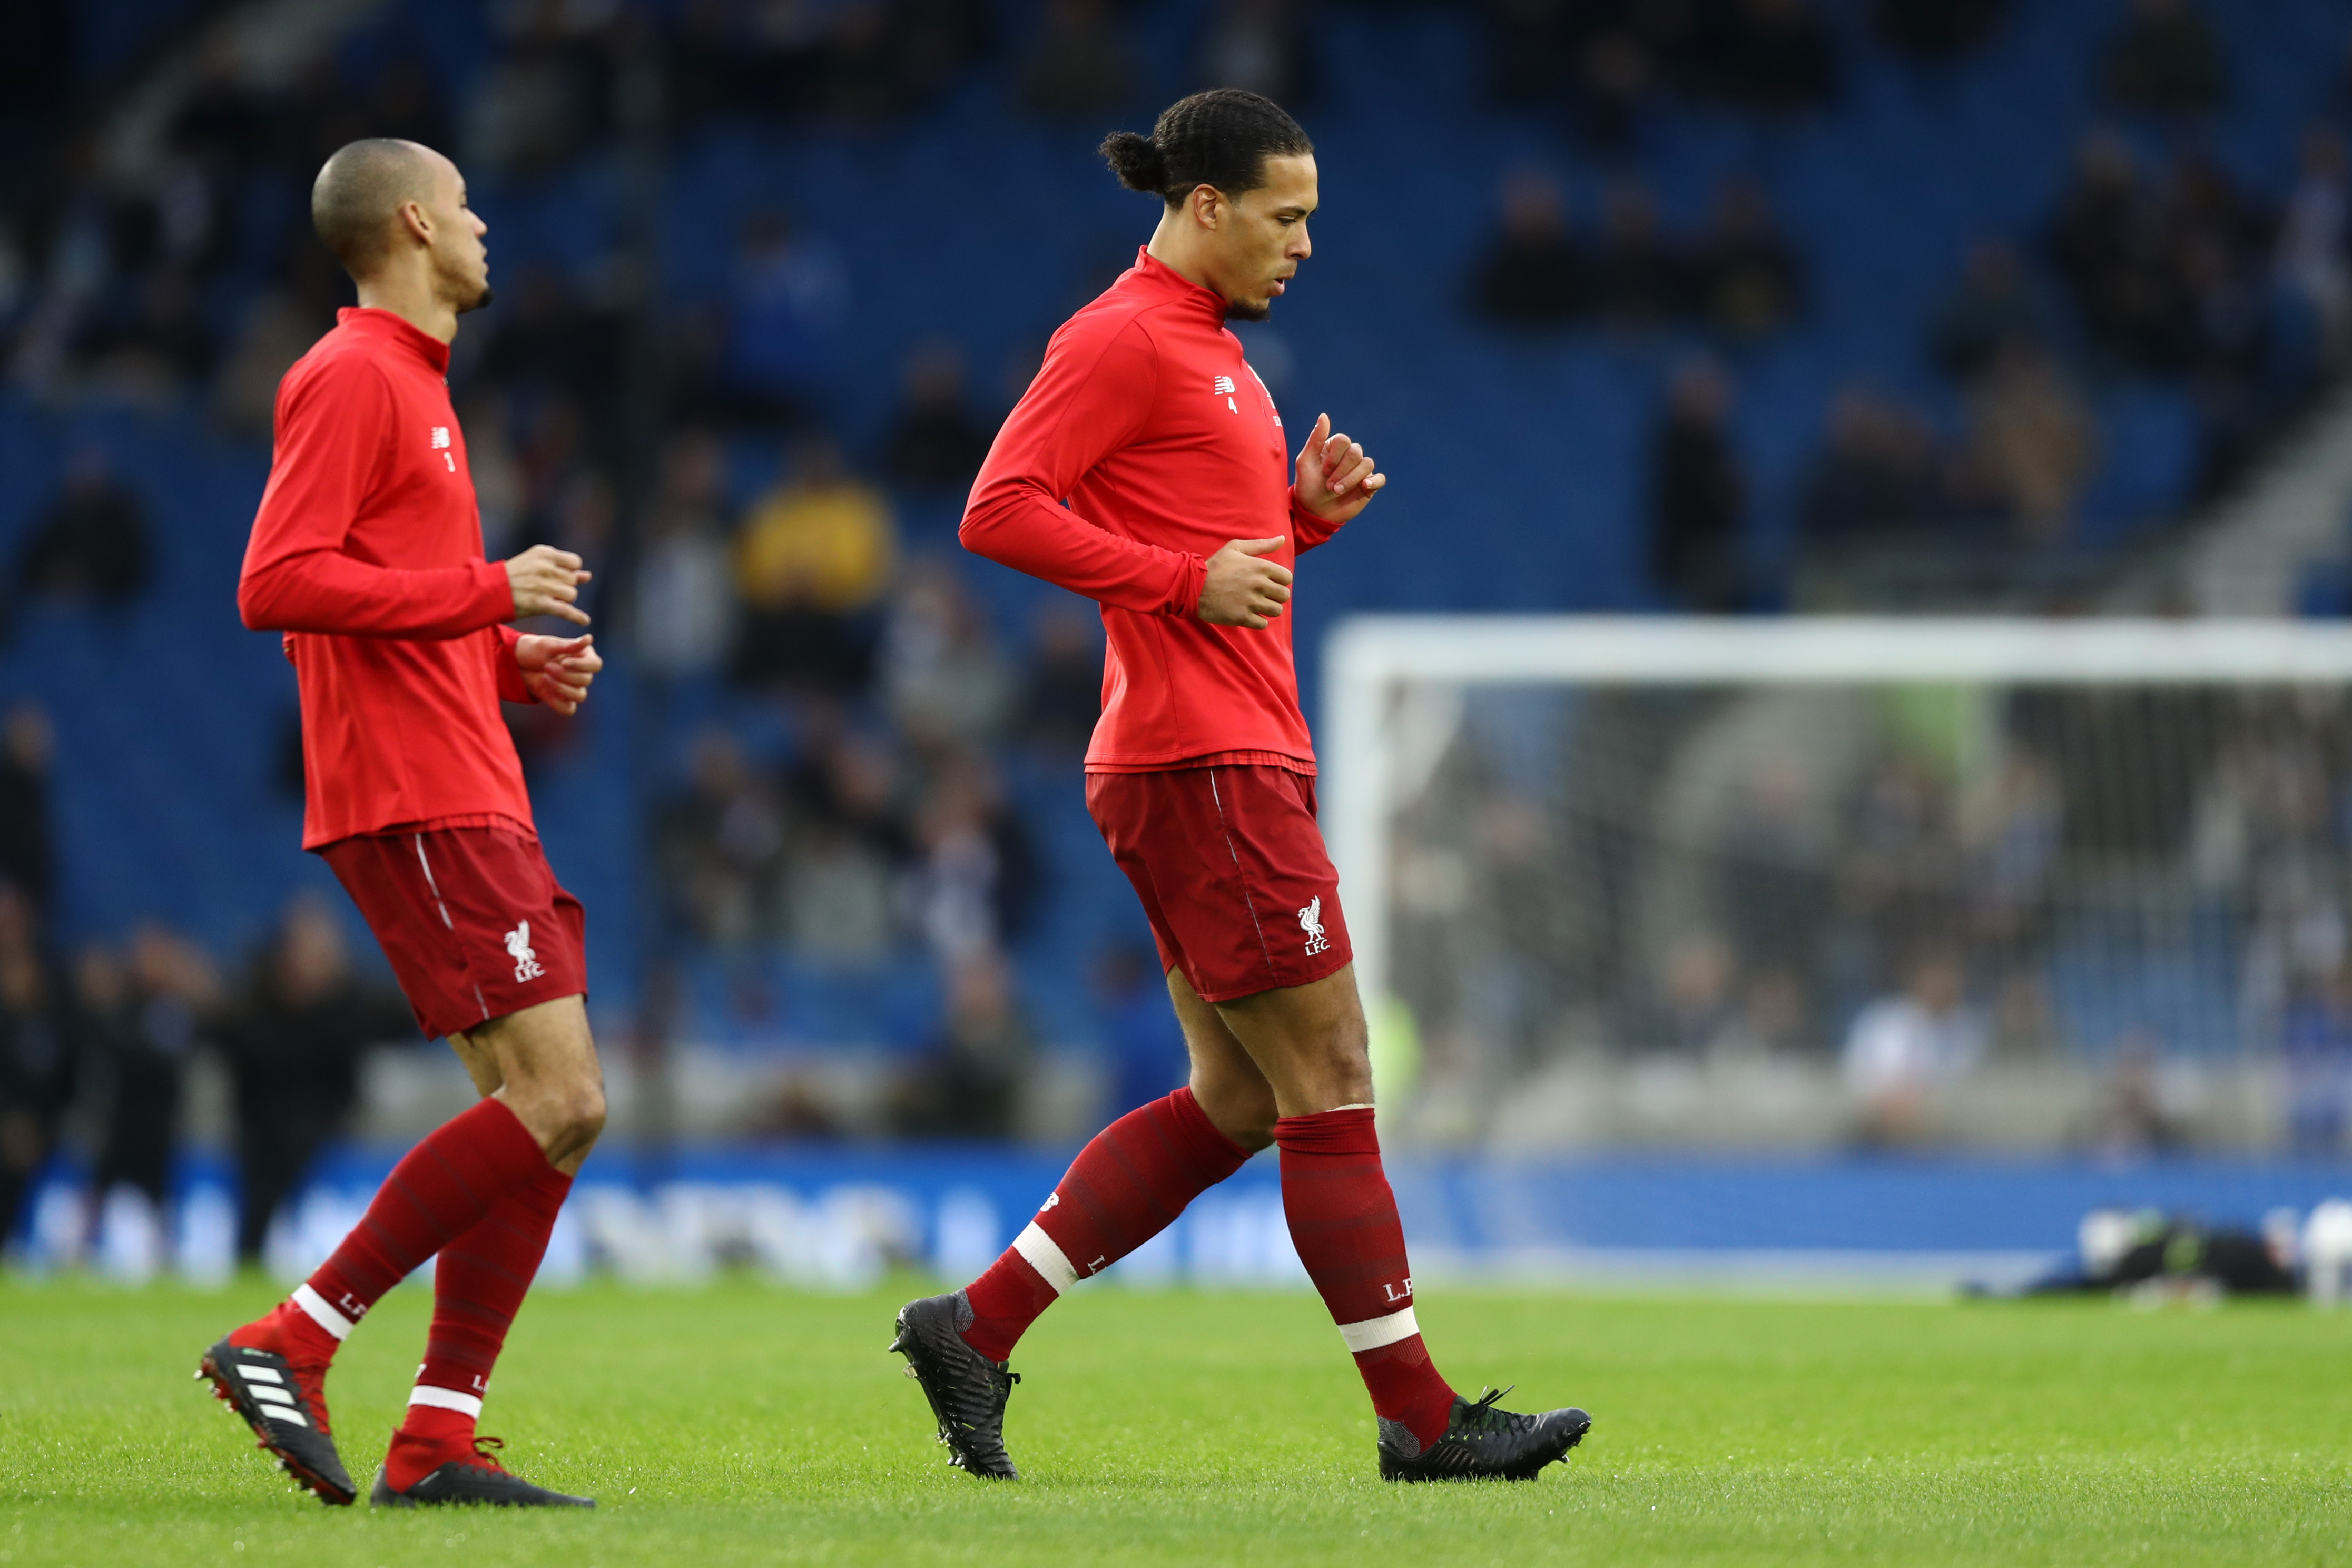 BRIGHTON, ENGLAND - JANUARY 12:  Virgil van Dijk of Liverpool warms up prior to the Premier League match between Brighton & Hove Albion and Liverpool FC at American Express Community Stadium on January 12, 2019 in Brighton, United Kingdom.  (Photo by Bryn Lennon/Getty Images)